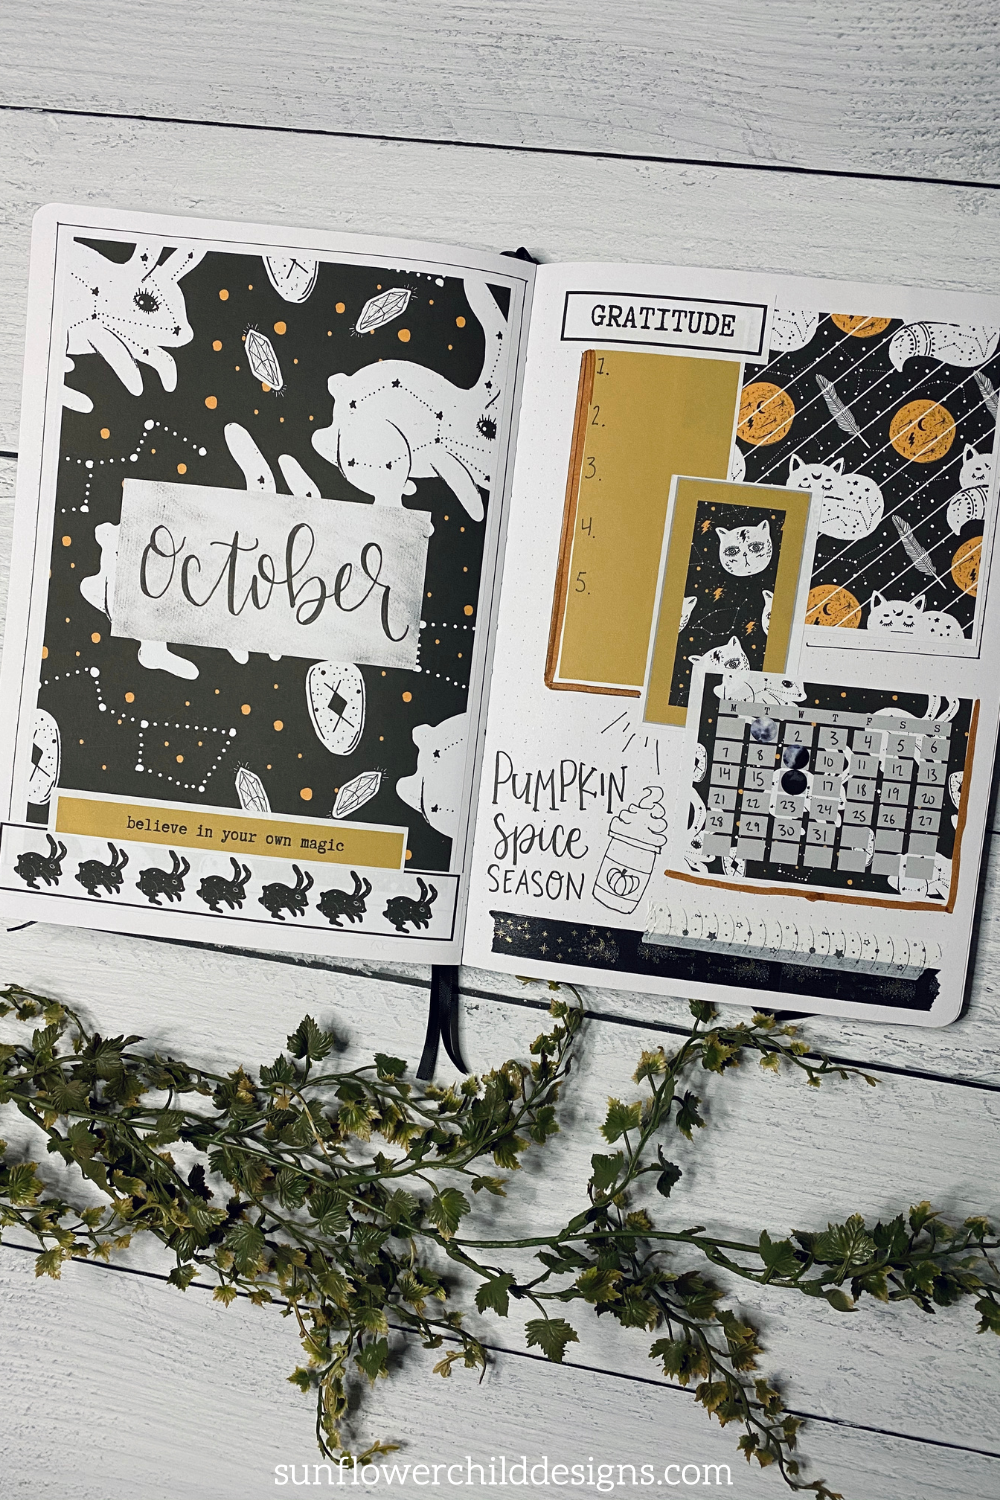 Free Printable Stickers for Your October Bullet Journal Layout